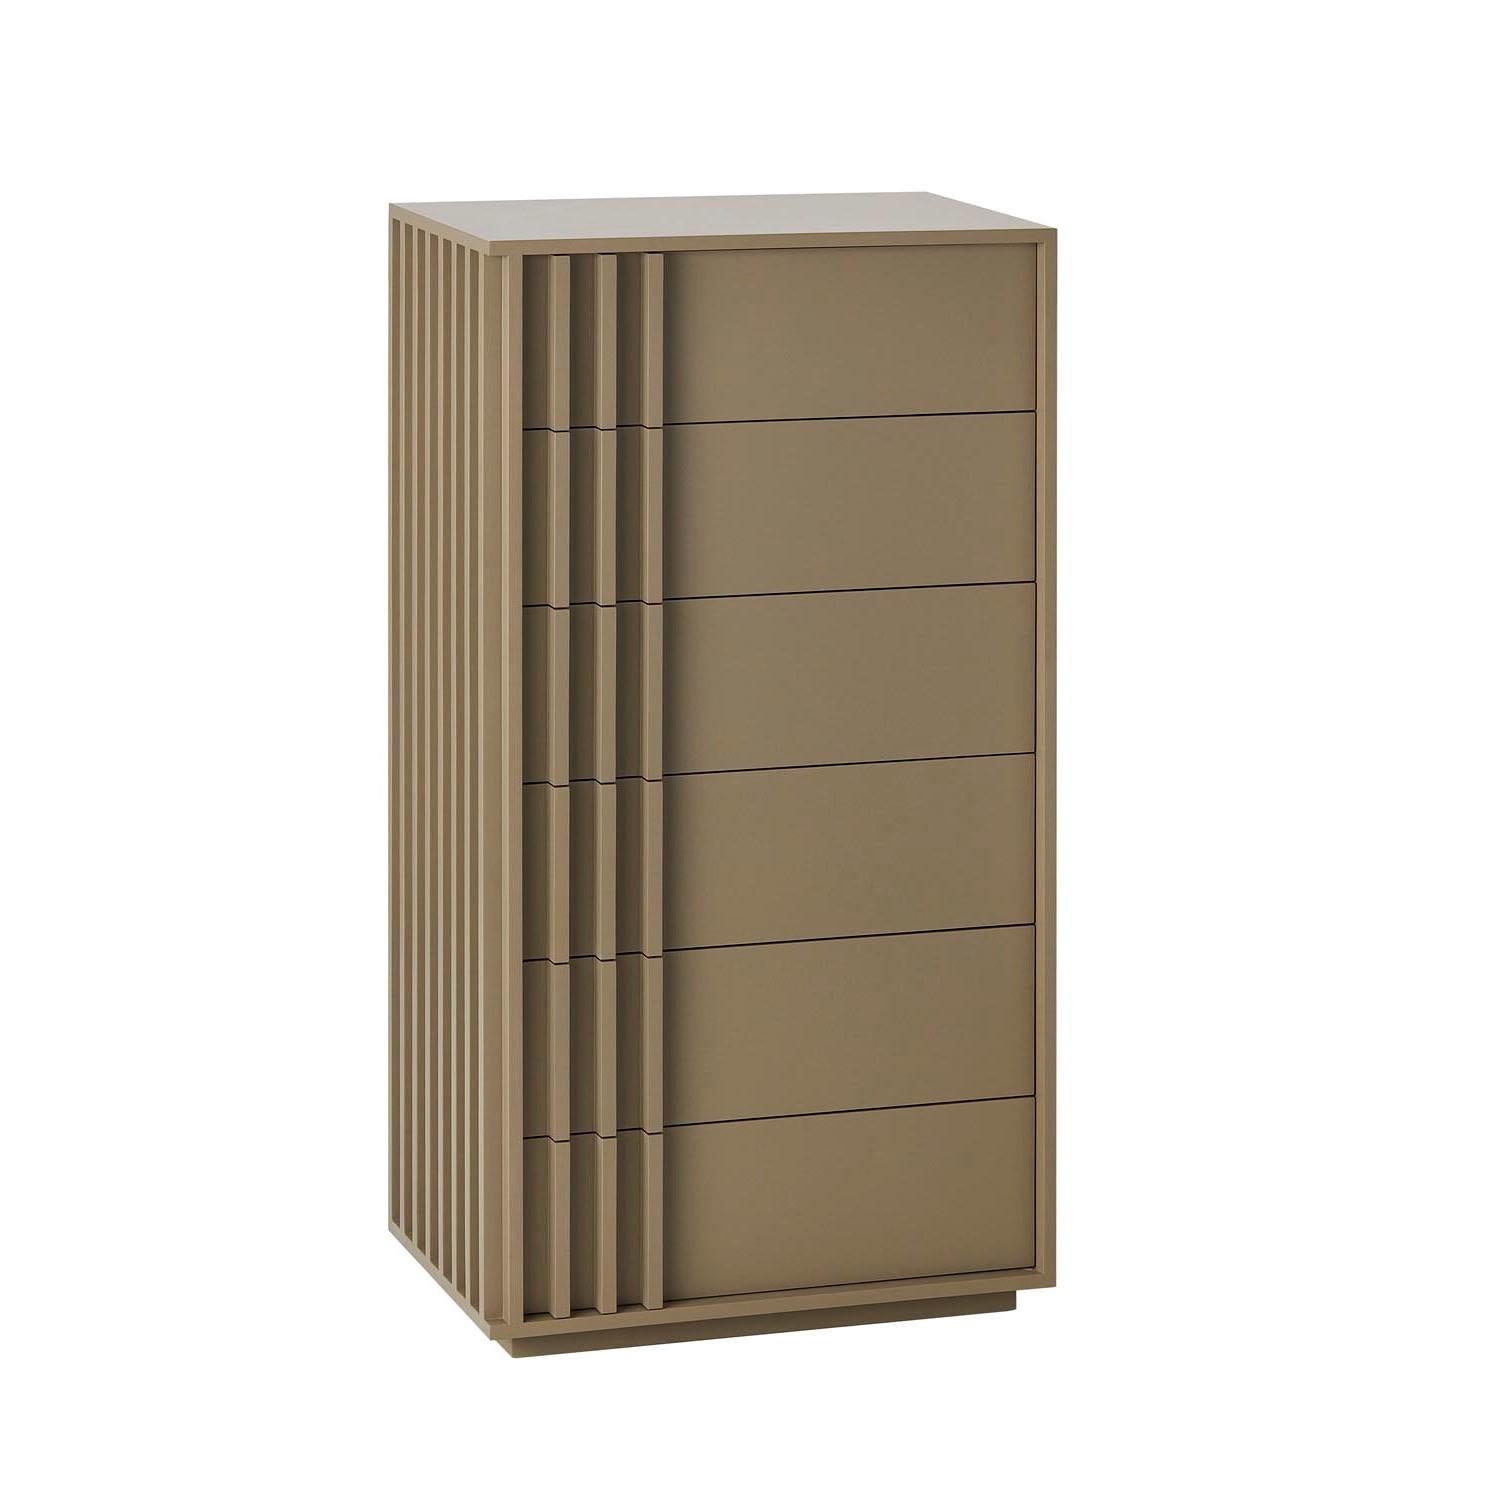 Relevo Tallboy has a modern style, with six drawers to simplify storage and keeping the elegance of the bedroom.

Matte lacquered structure in CM8 color with lined interior drawers.
 